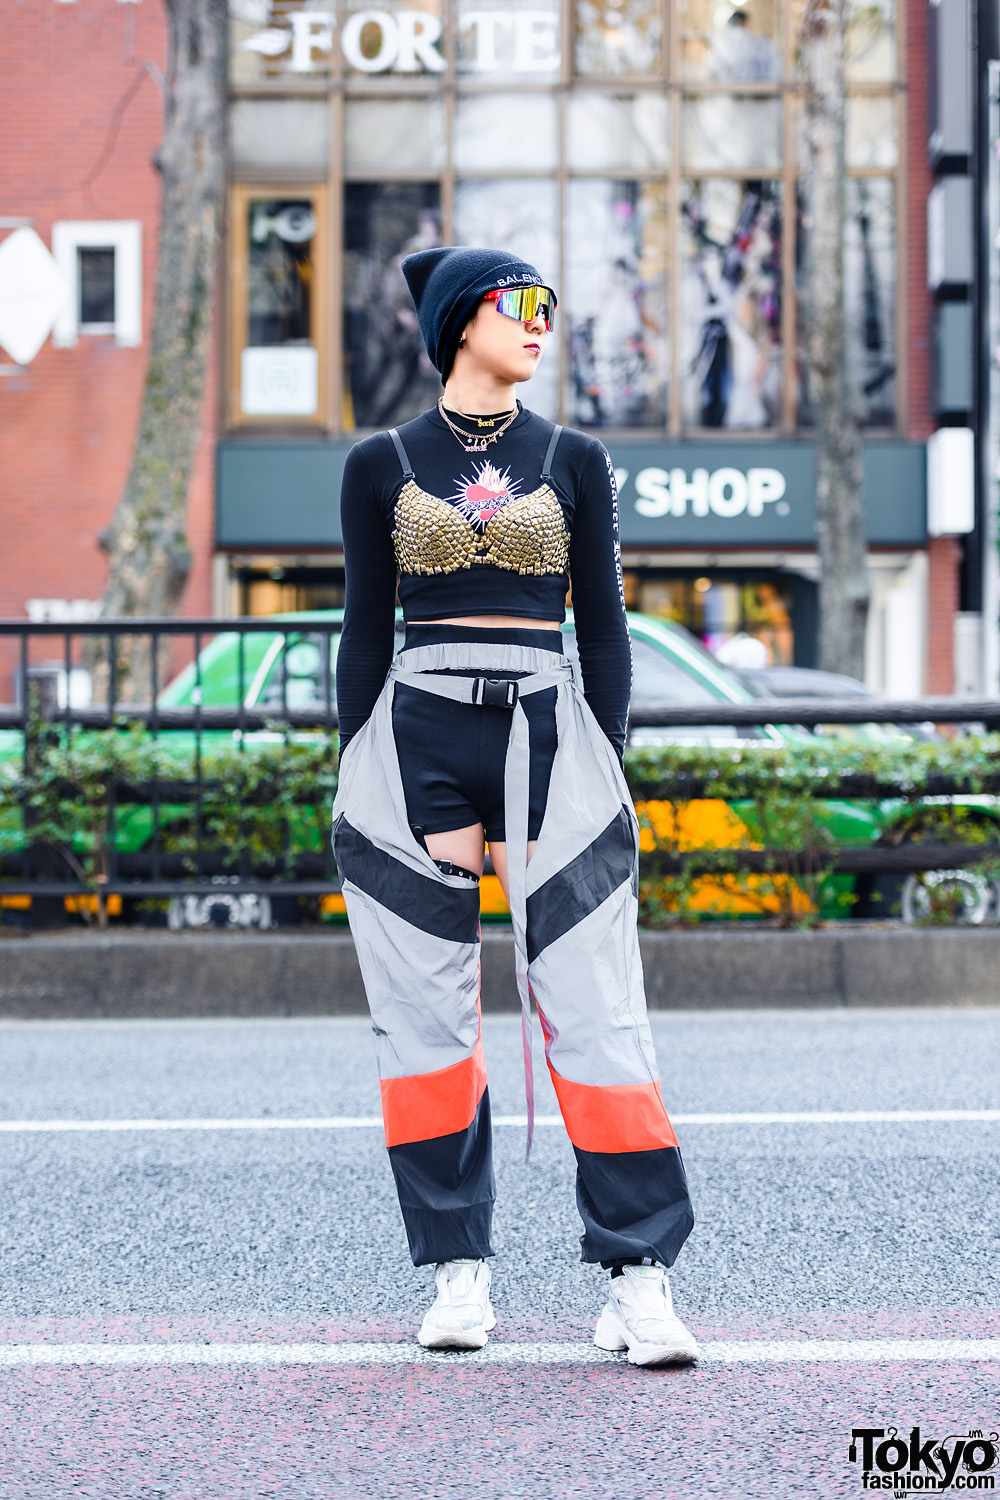 Tokyo Sporty Streetwear Style w/ Visor Sunglasses, Balenciaga Beanie, Pinnap Statement Necklaces, Studded Bralette, Gallerie Crotchless Pants & Jeffrey Campbell Metallic Sneakers